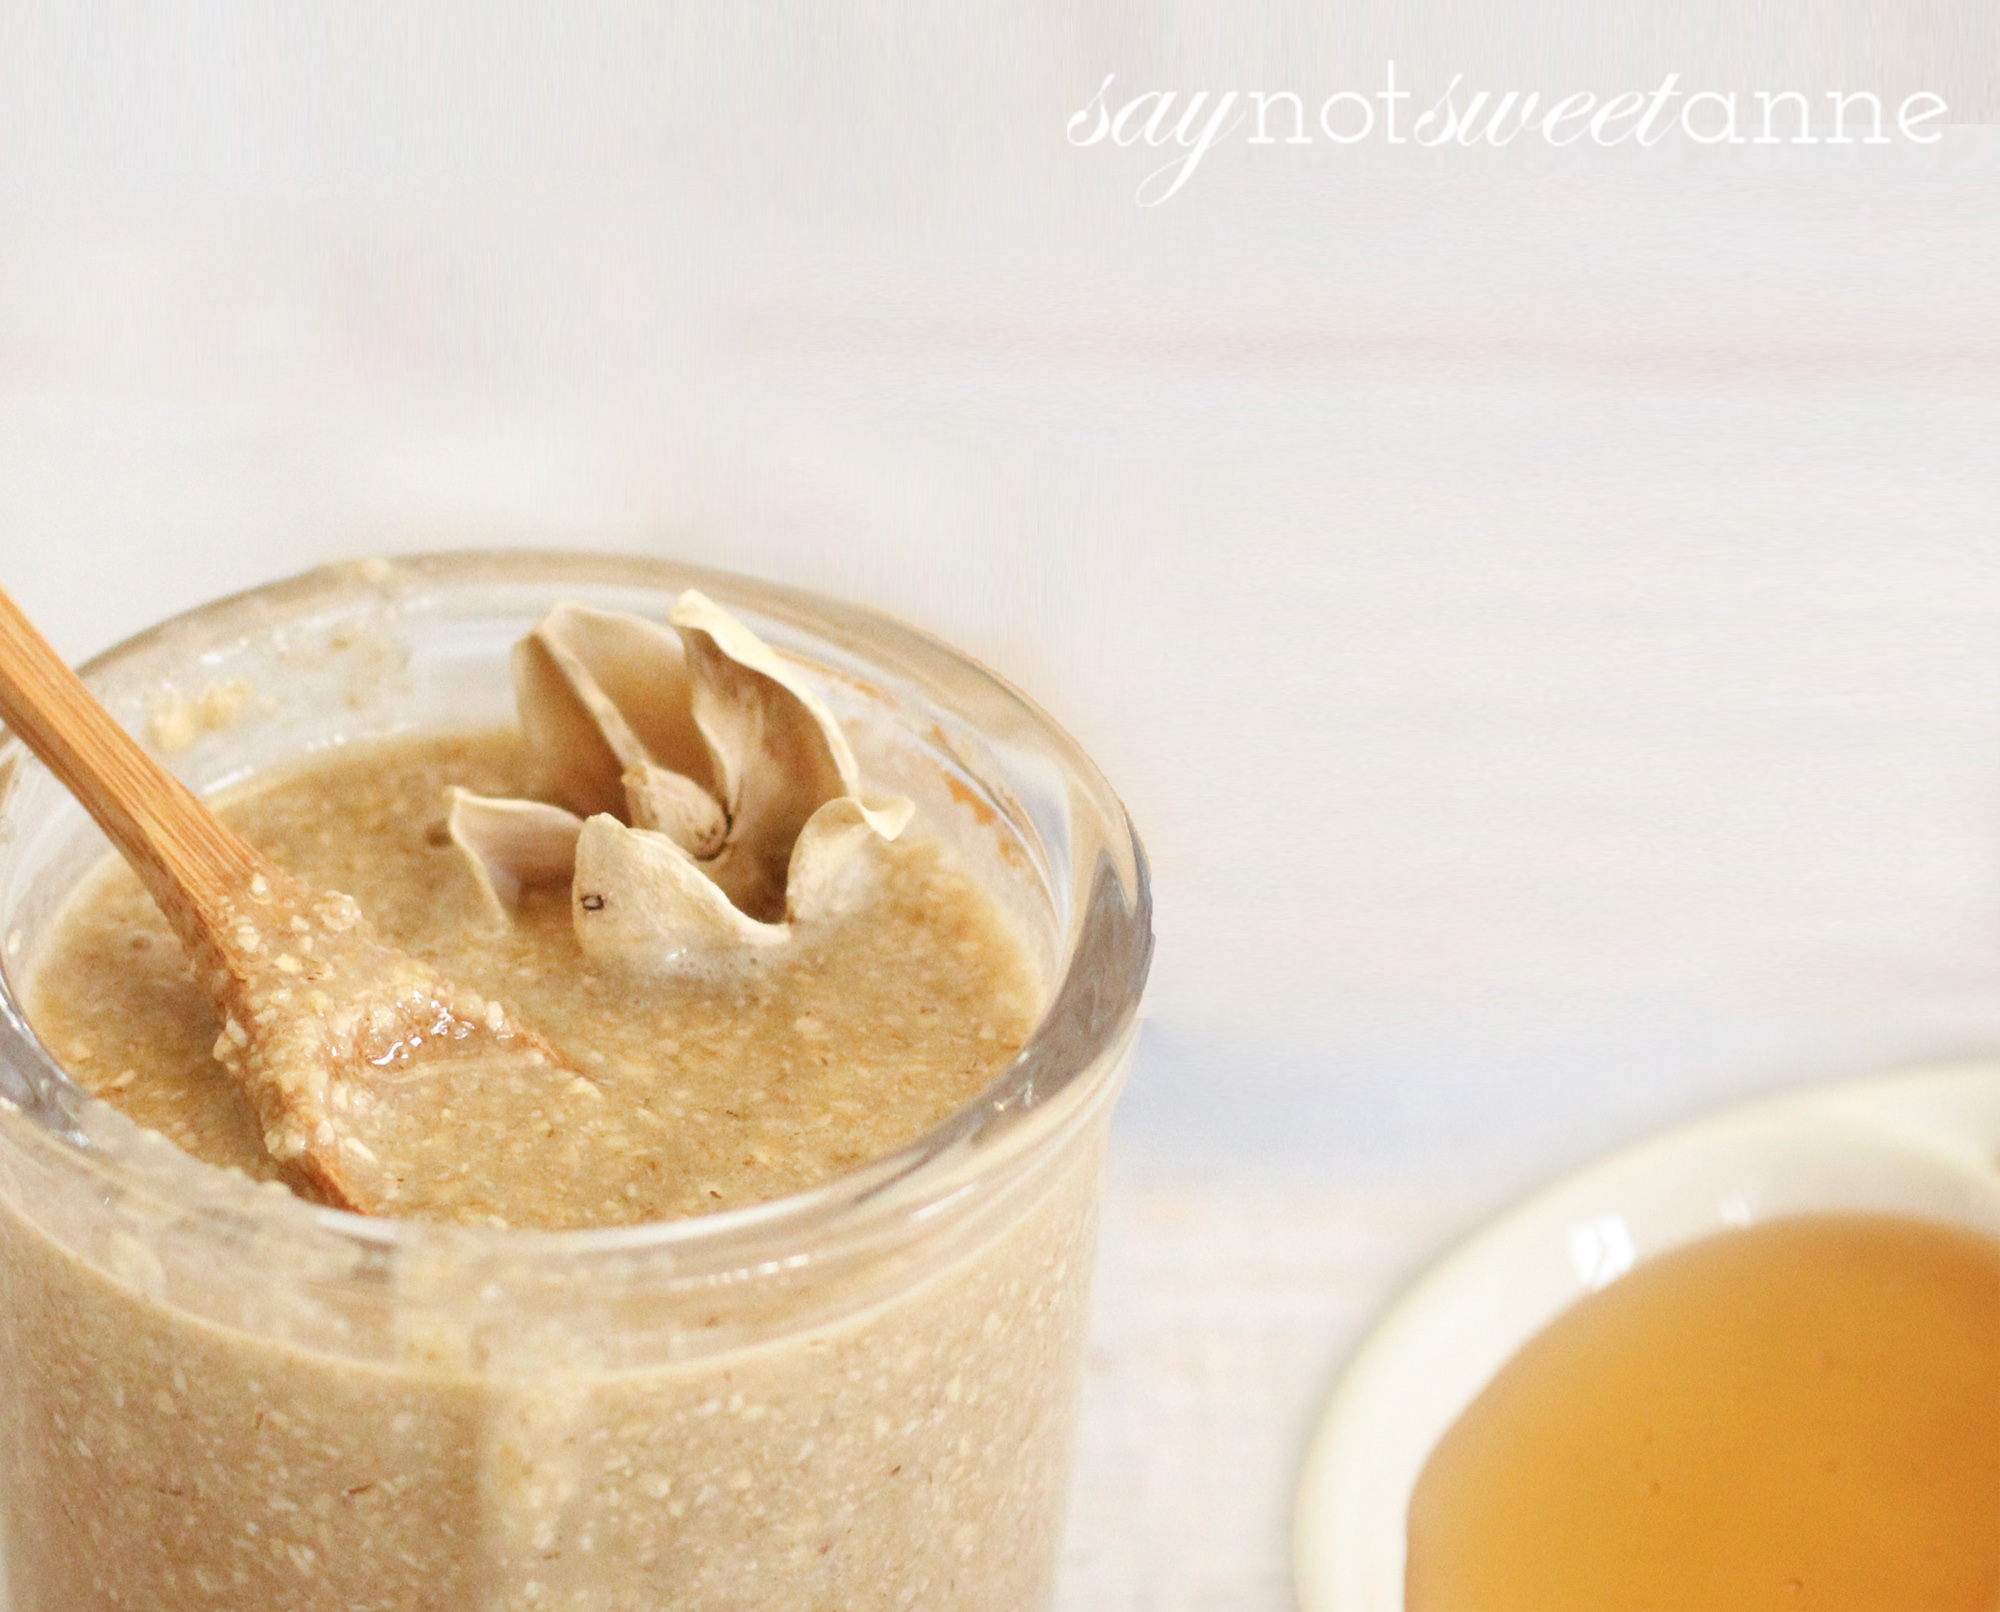 Natural Pore Shrinking Mask with honey and oatmeal. Gentle, easy and affordable DIY mask for healthy and better looking skin! | saynotsweetanne.com